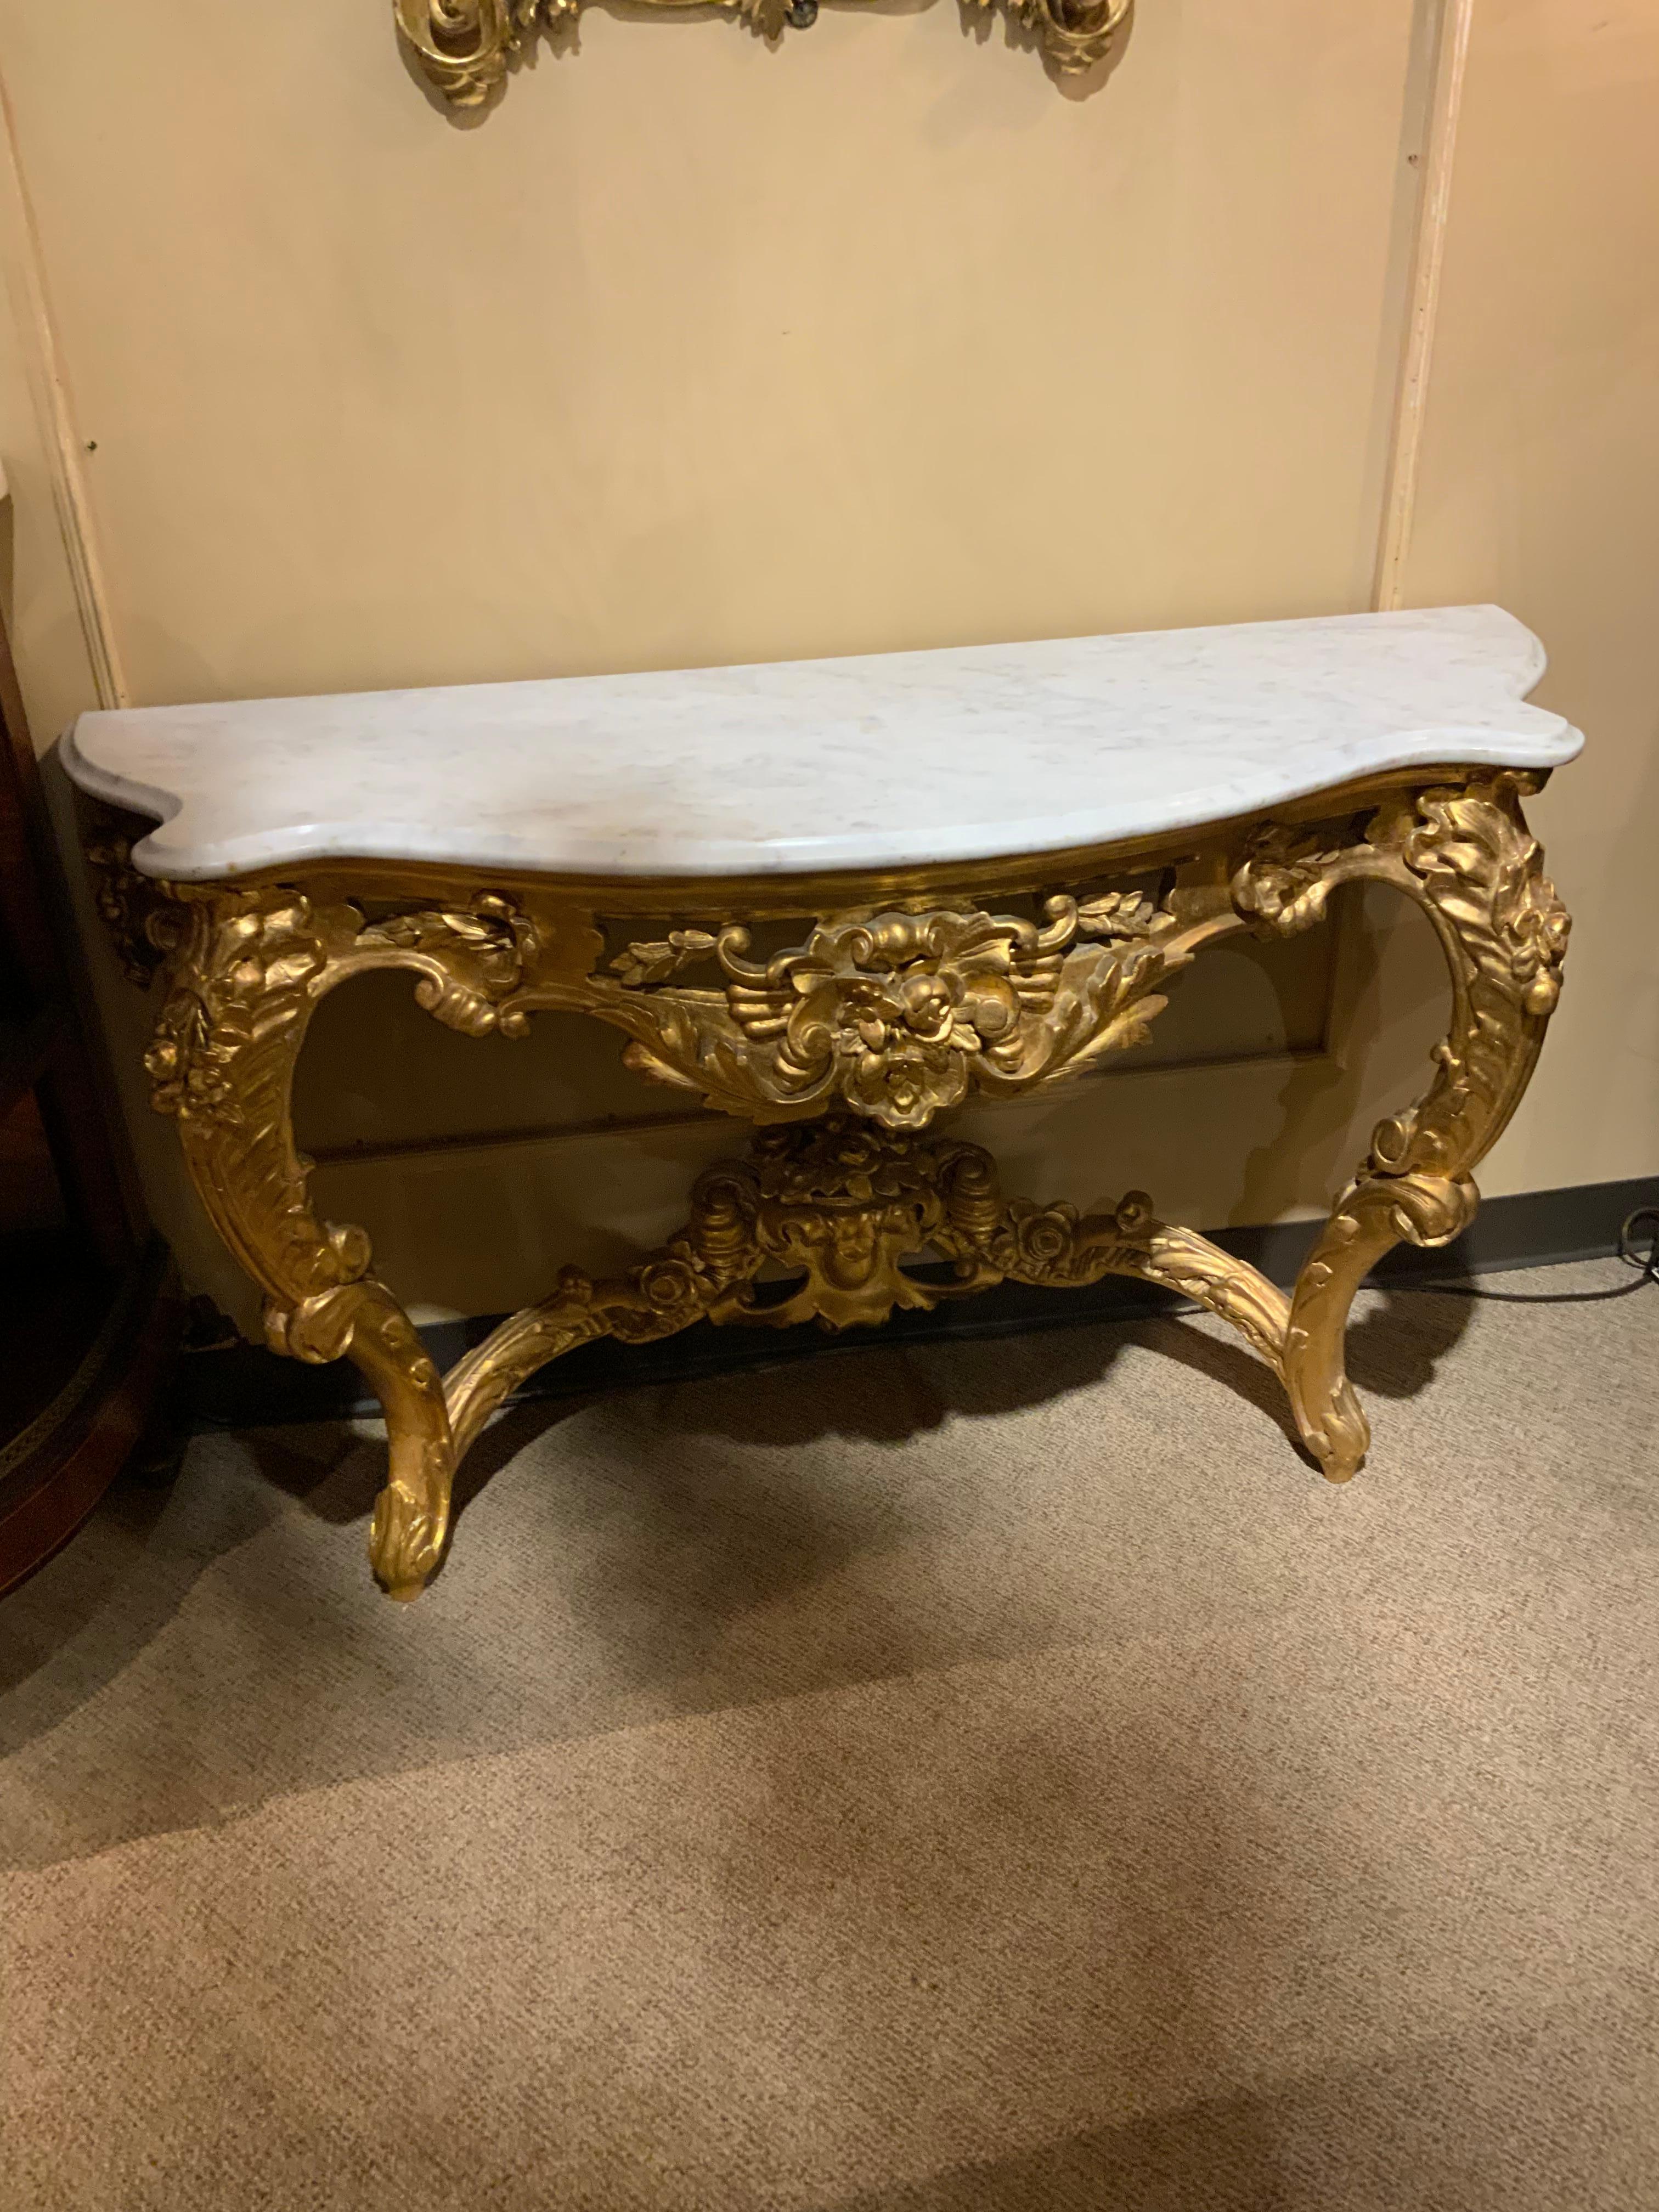 These giltwood pieces are exceptional because the giltwood is in very
Good condition with the original patina. The marble has not chips,
Restorations or stains. The floral and foliate carving is well done and
Has beautiful carving along the apron